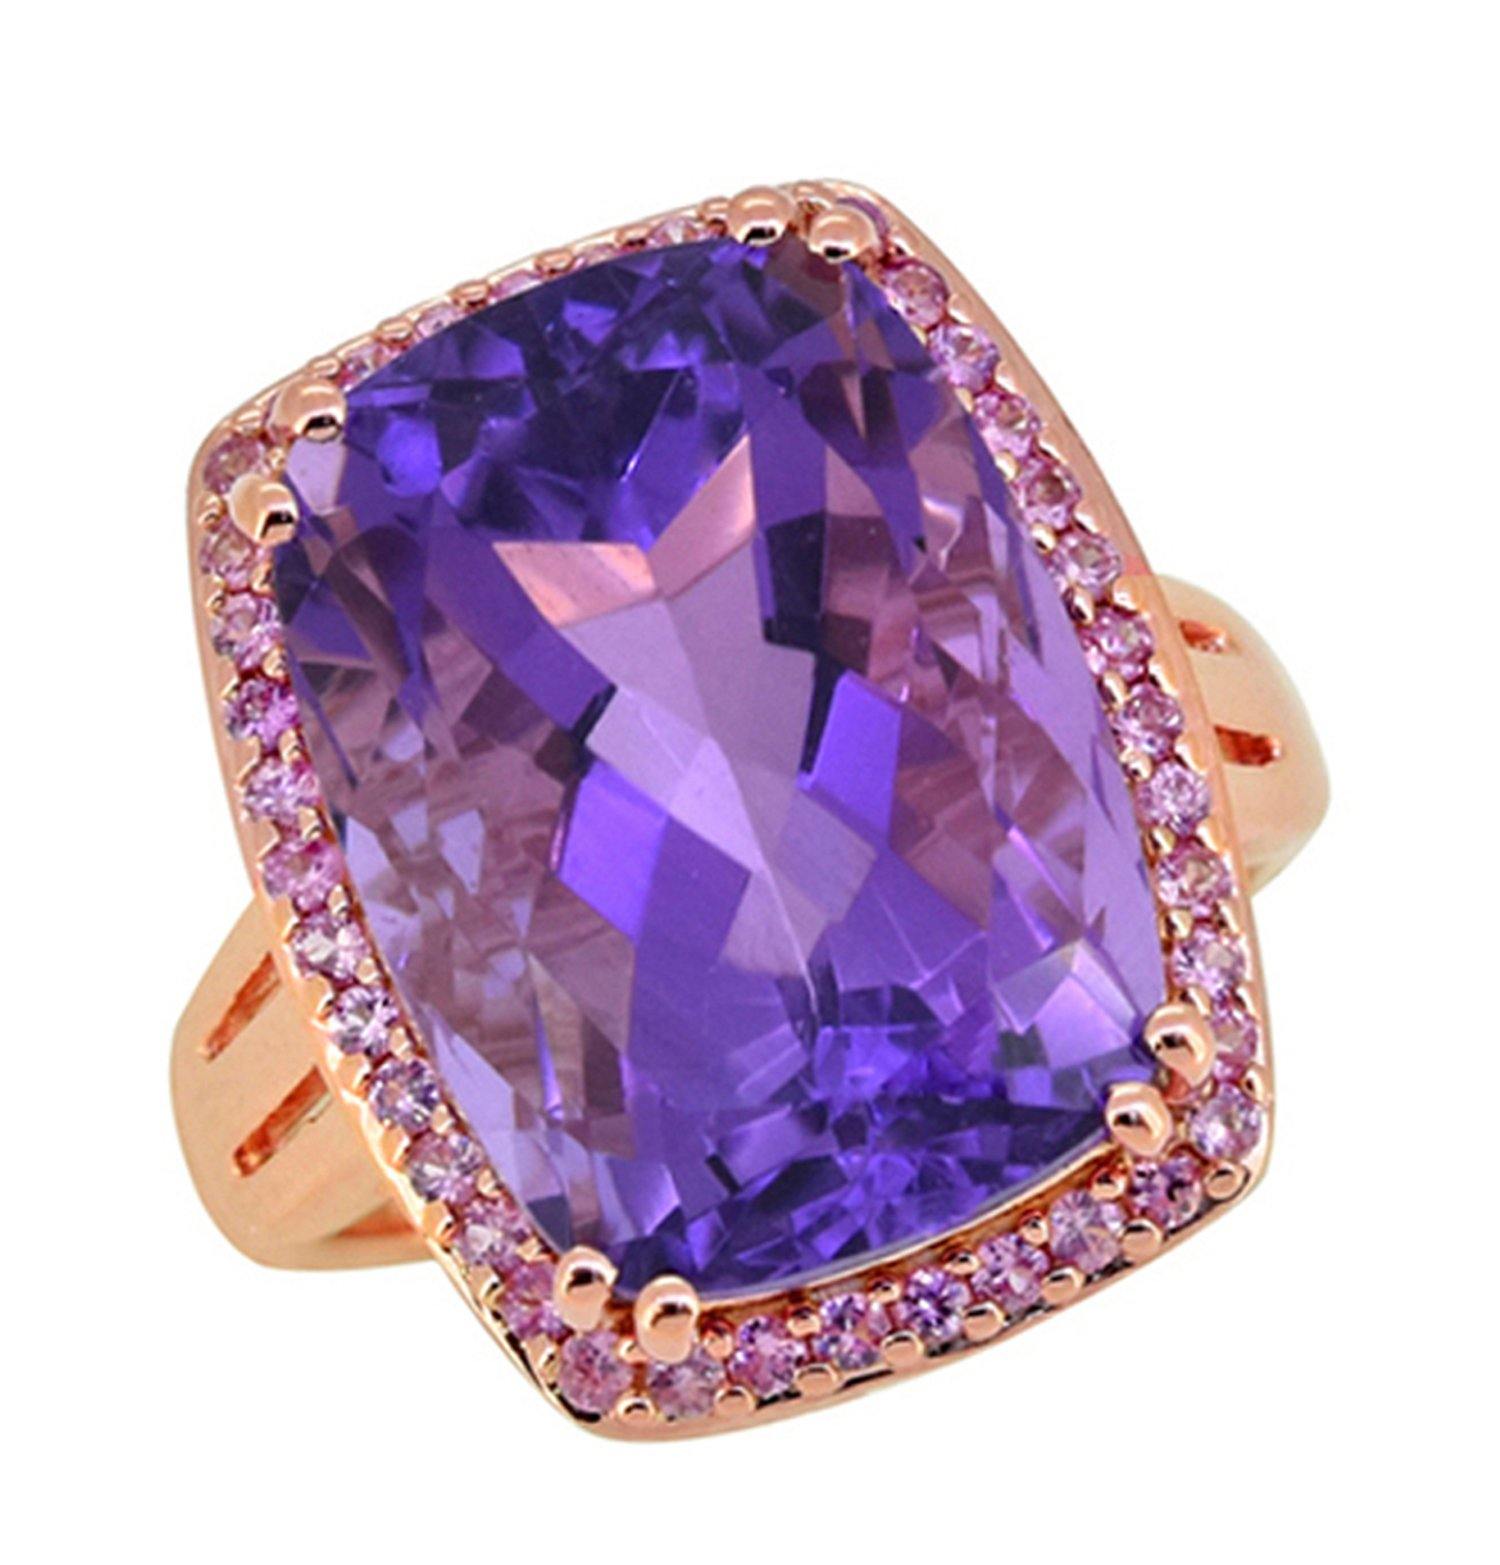 13.44 ct Amethyst Pink Sapphire Solid 925 Sterling Silver Rose Gold Plated Ring Jewelry - YoTreasure